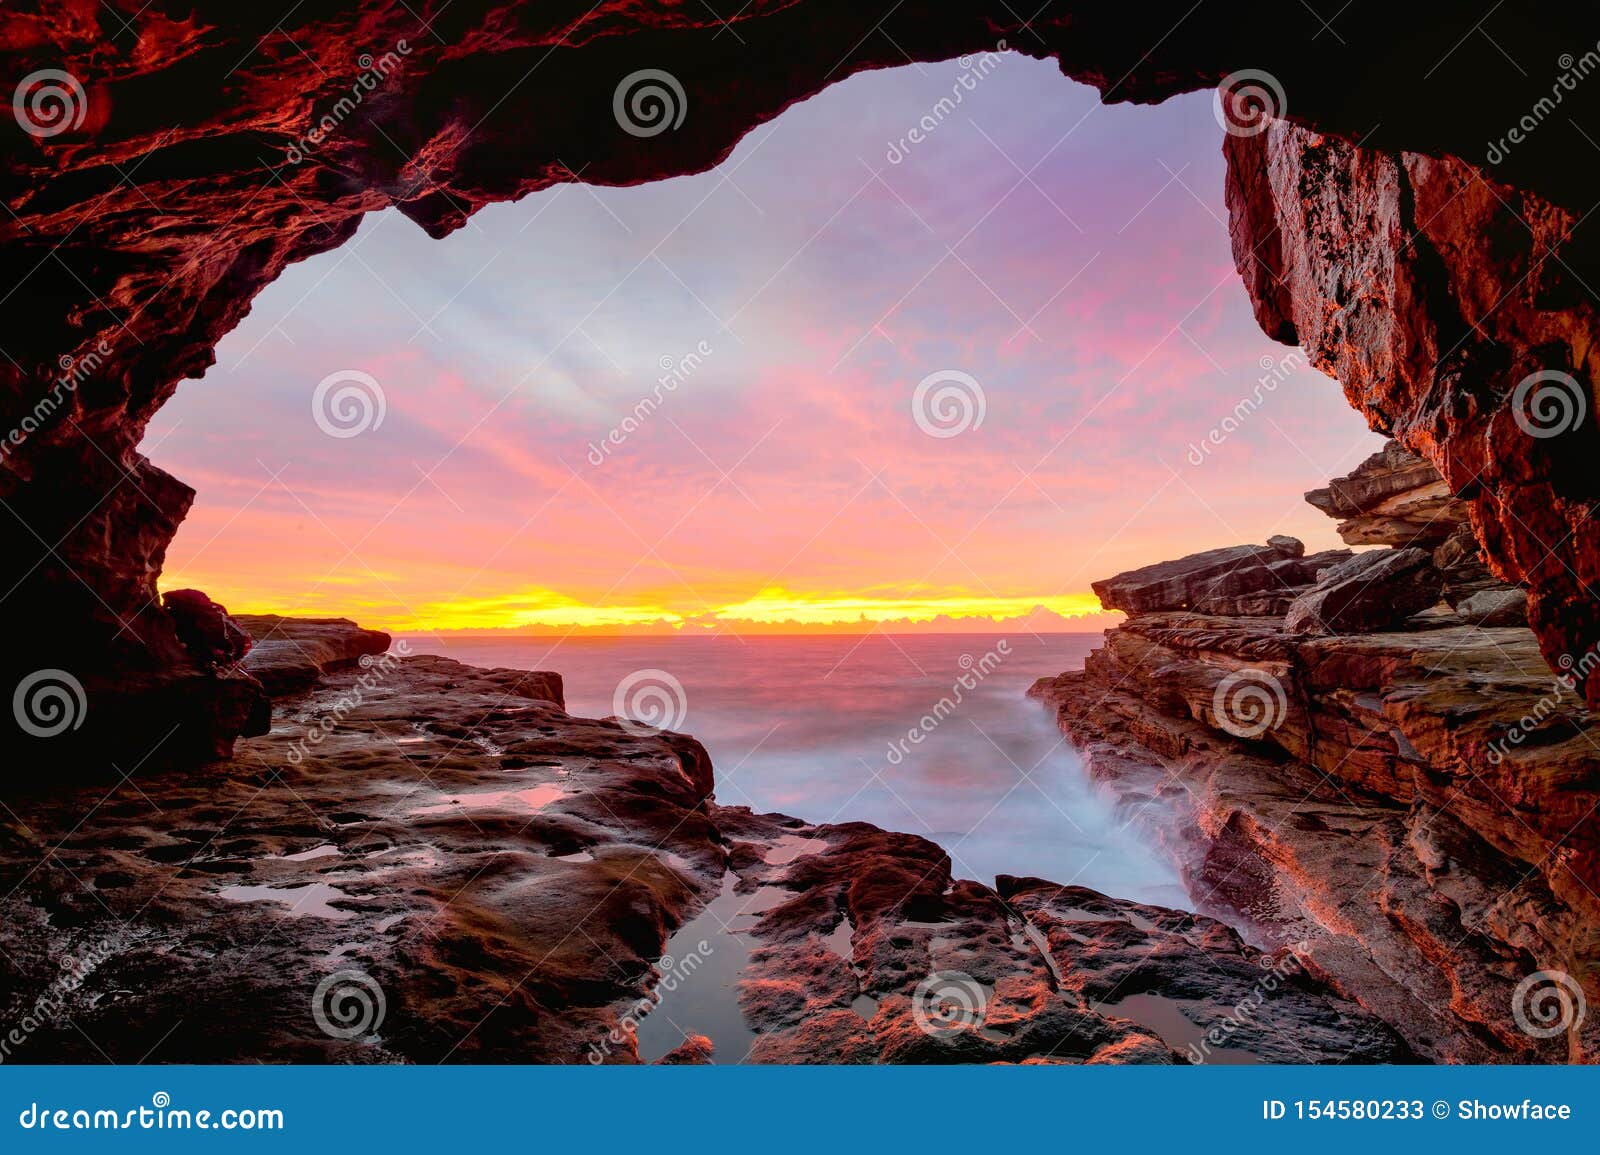 coastal cave views to glorious sunrise over the ocean